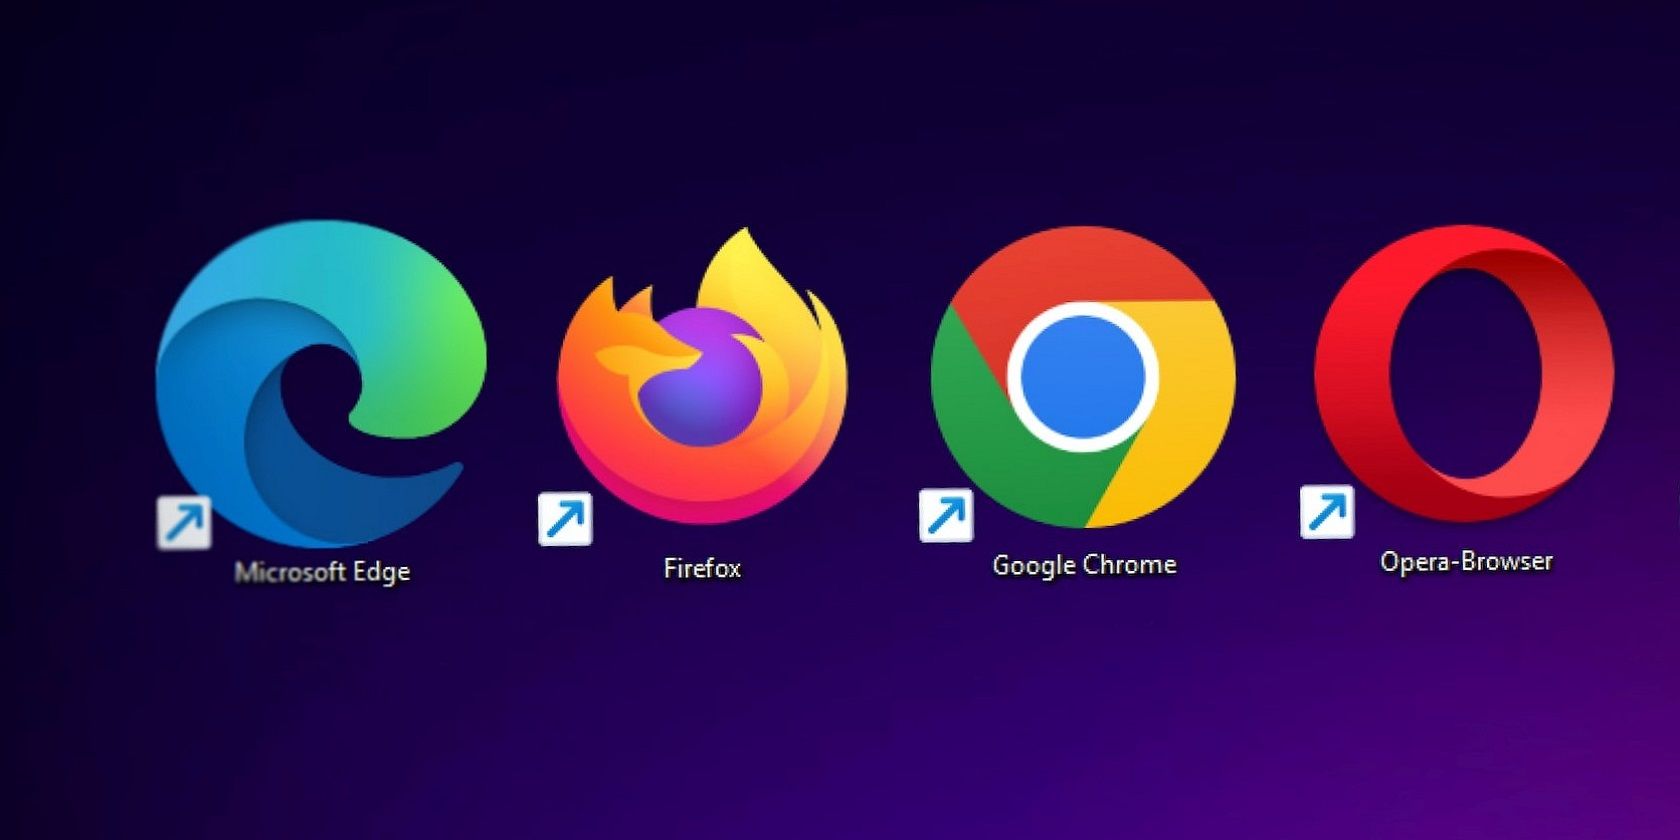 The Edge, Firefox, Google Chrome, and Opera browser icons